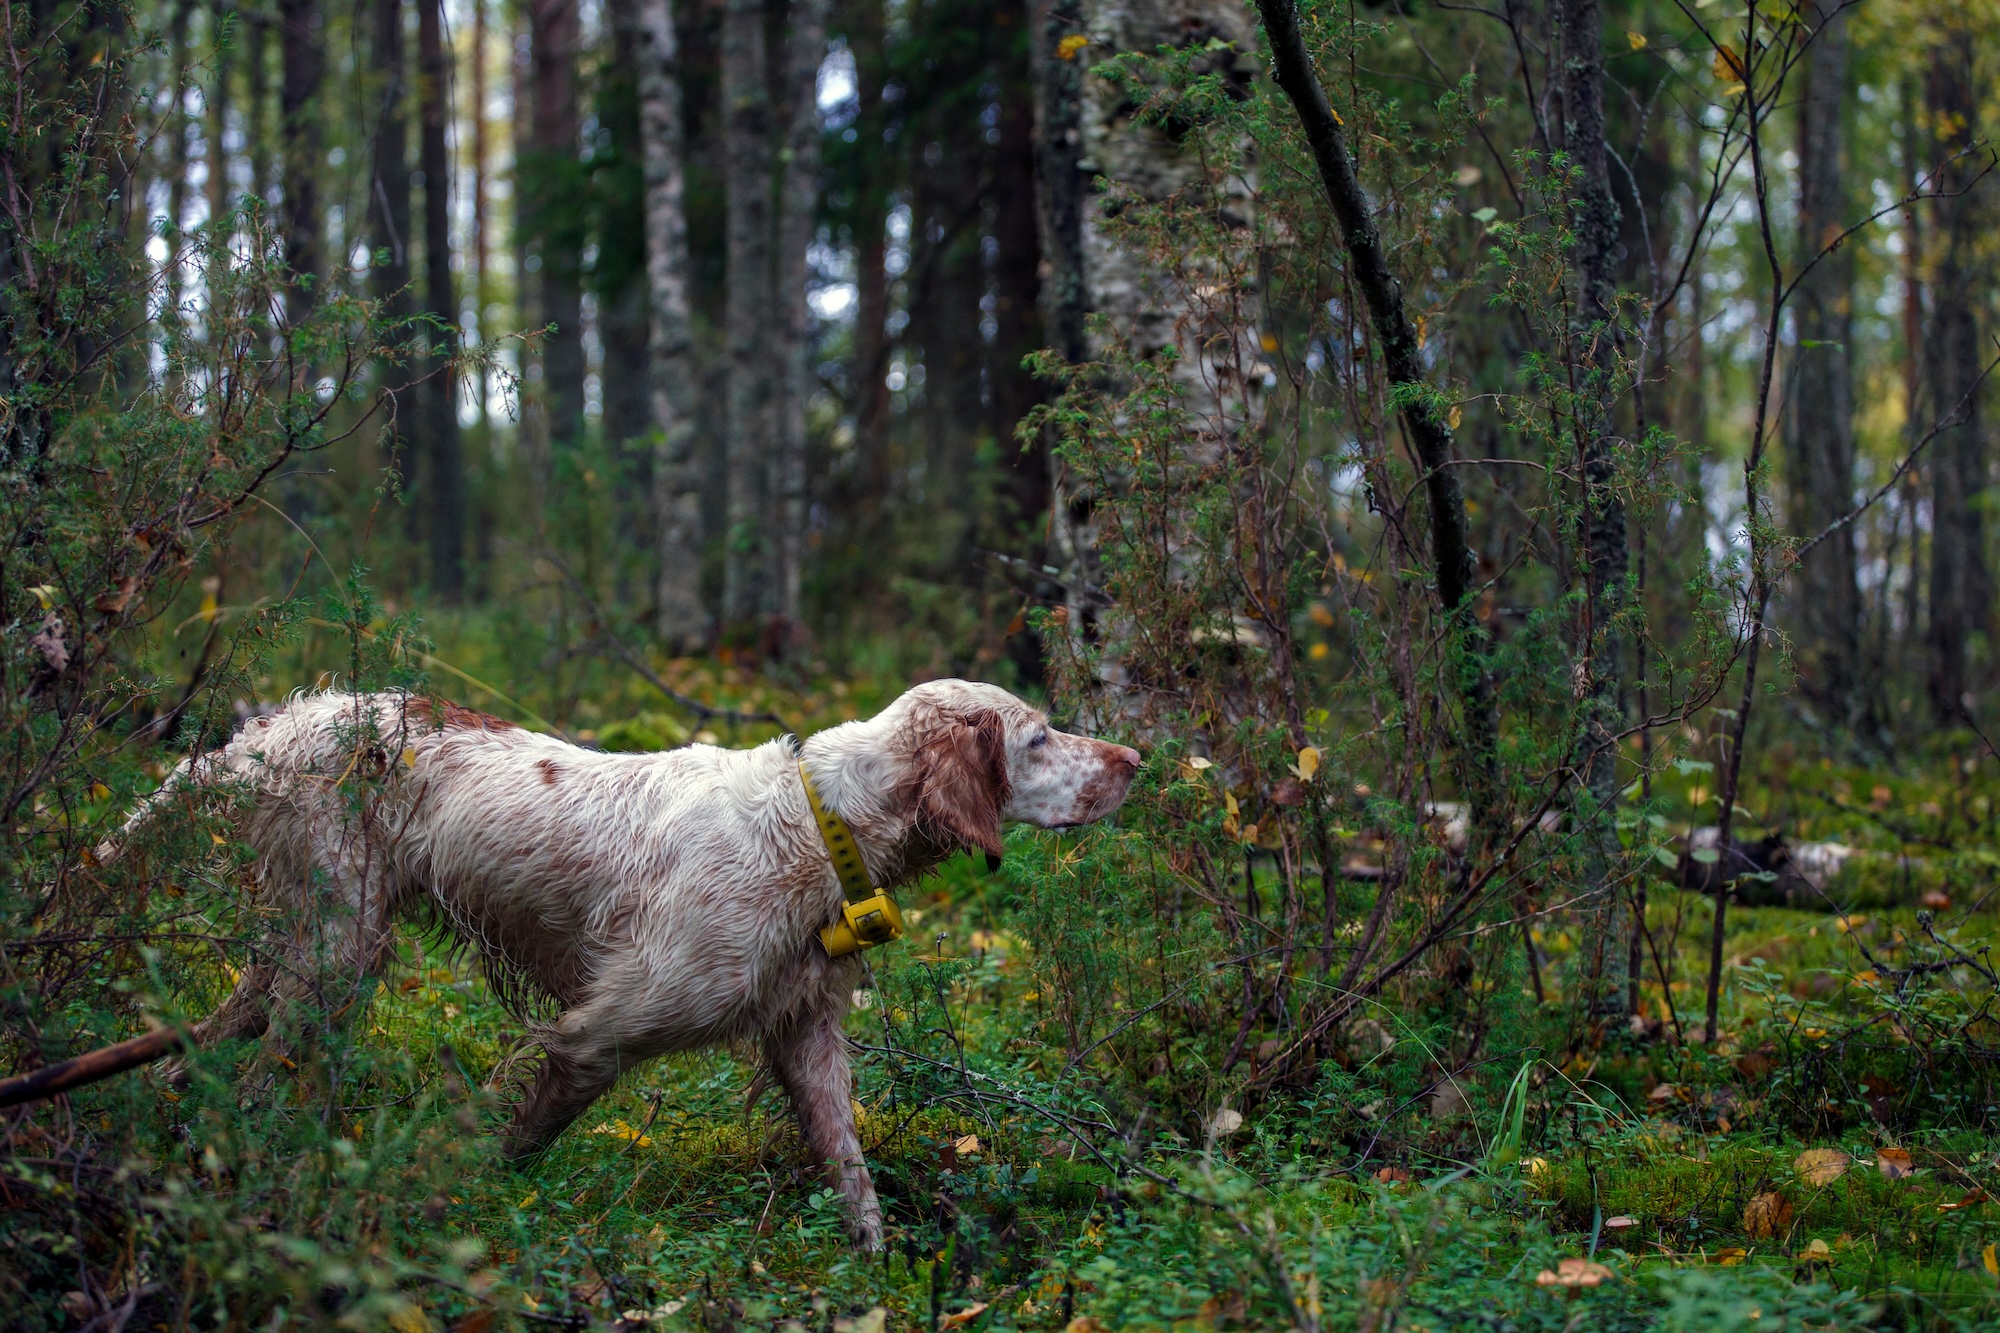 An English setter in the grouse woods.